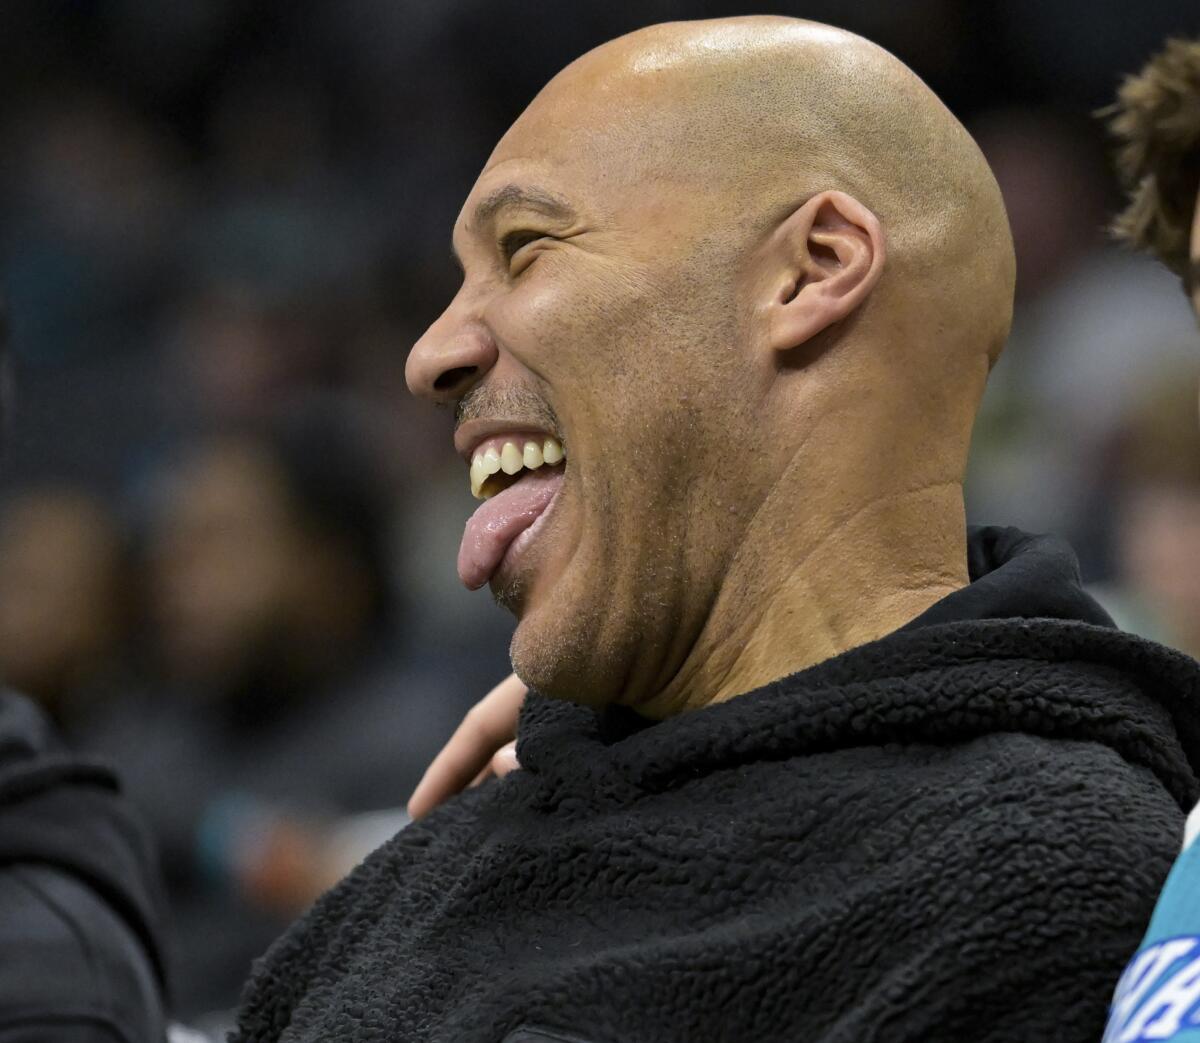 LaVar Ball smiles with his tongue out during a game between the Charlotte Hornets and Indiana Pacers.